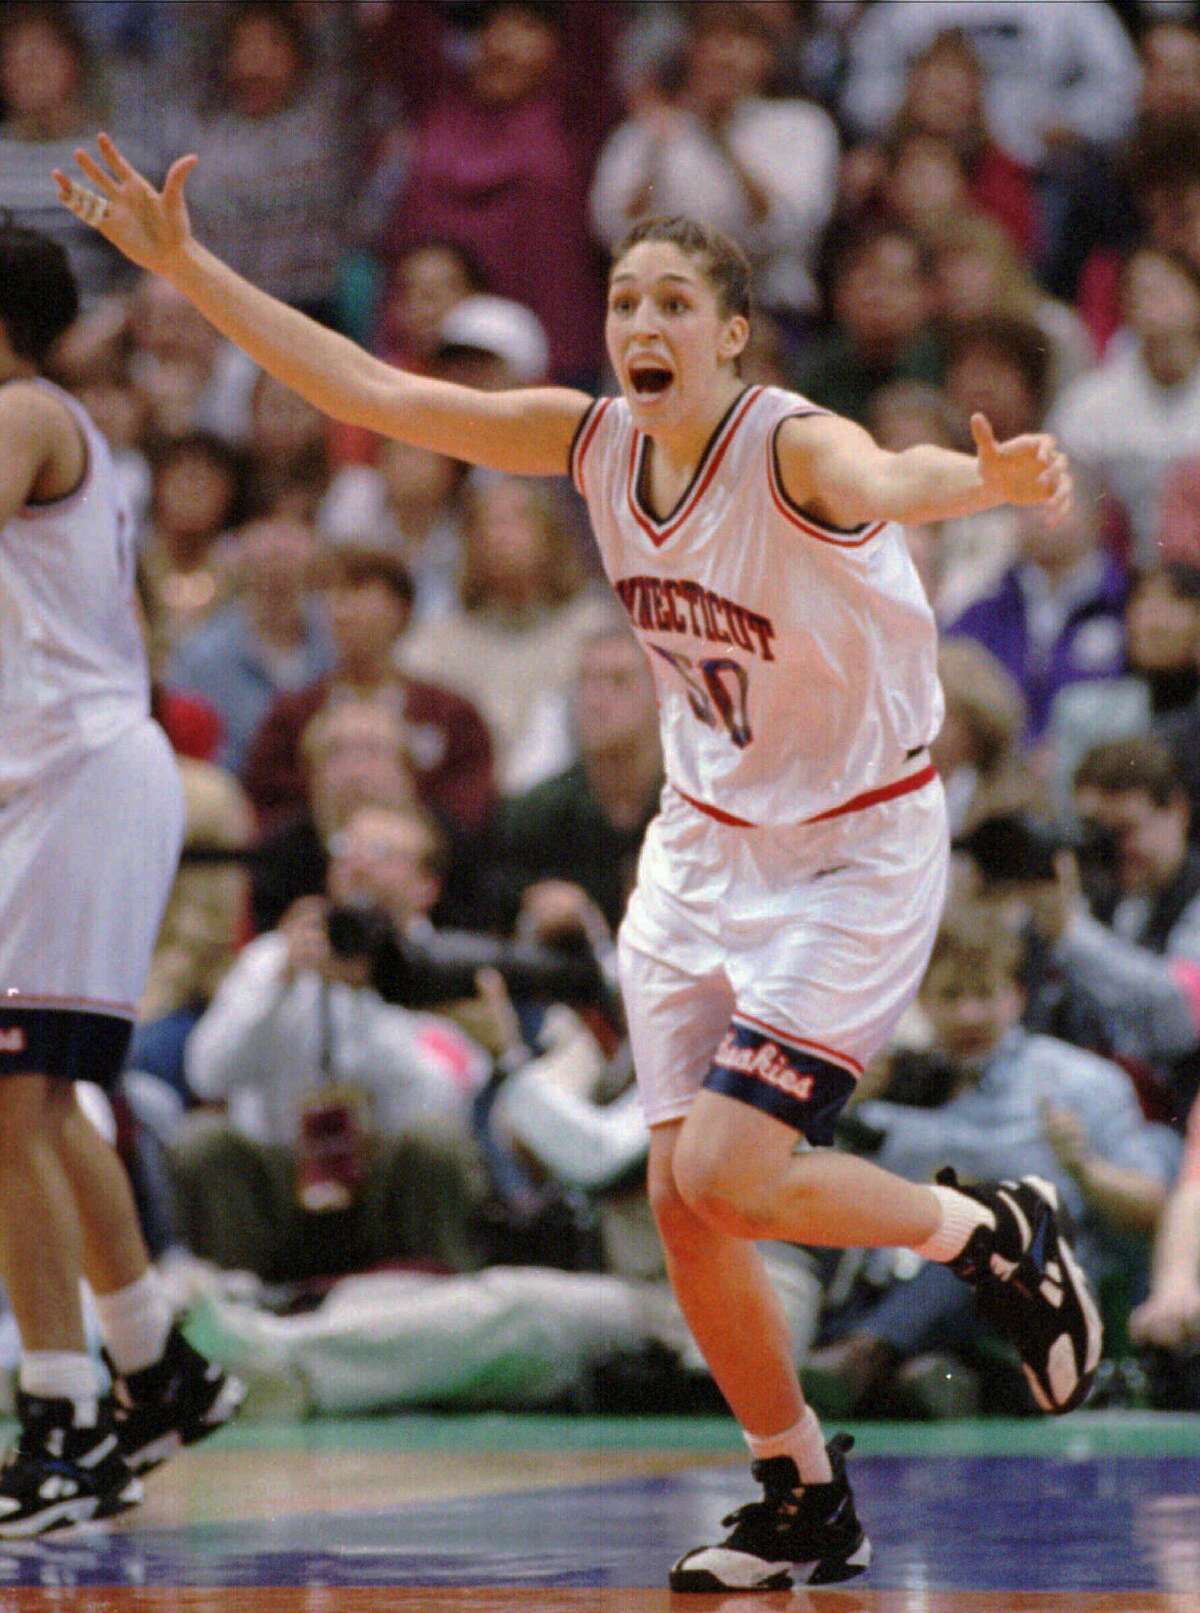 Connecticut's Rebecca Lobo races down the court after Connecticut won the NCAA Women's Final Four, 70-64, over Tennessee Sunday, April 2, 1995, in Minneapolis. Lobo led her team with 17 points and was named the outstanding player of the tournament. (AP Photo/Elise Amendola)